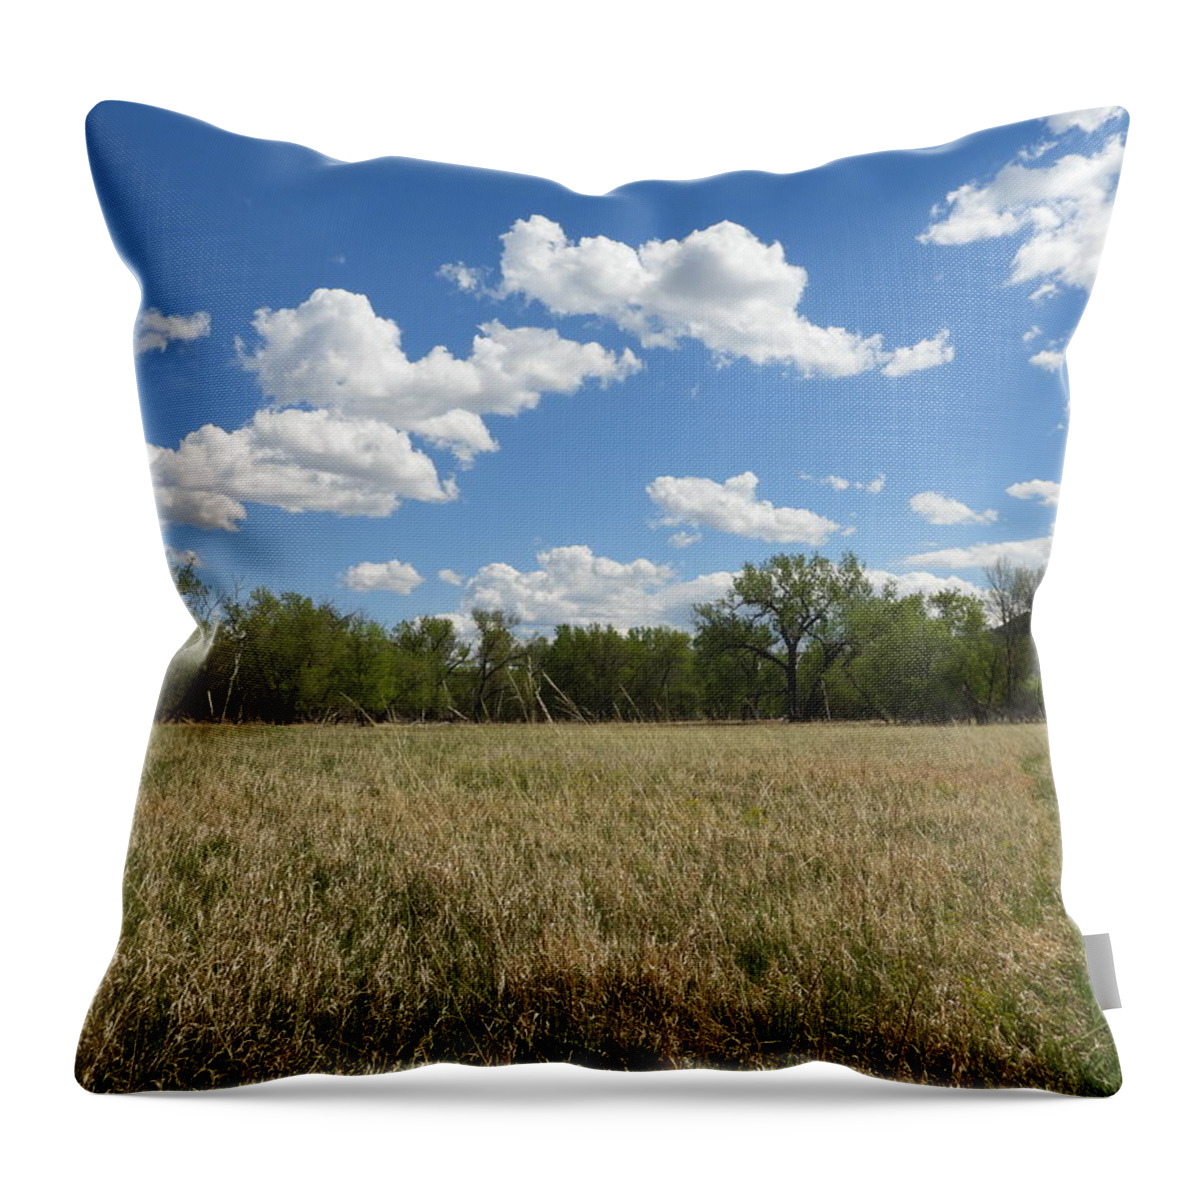 Meadow Throw Pillow featuring the photograph Clouds Over The Meadow by Amanda R Wright